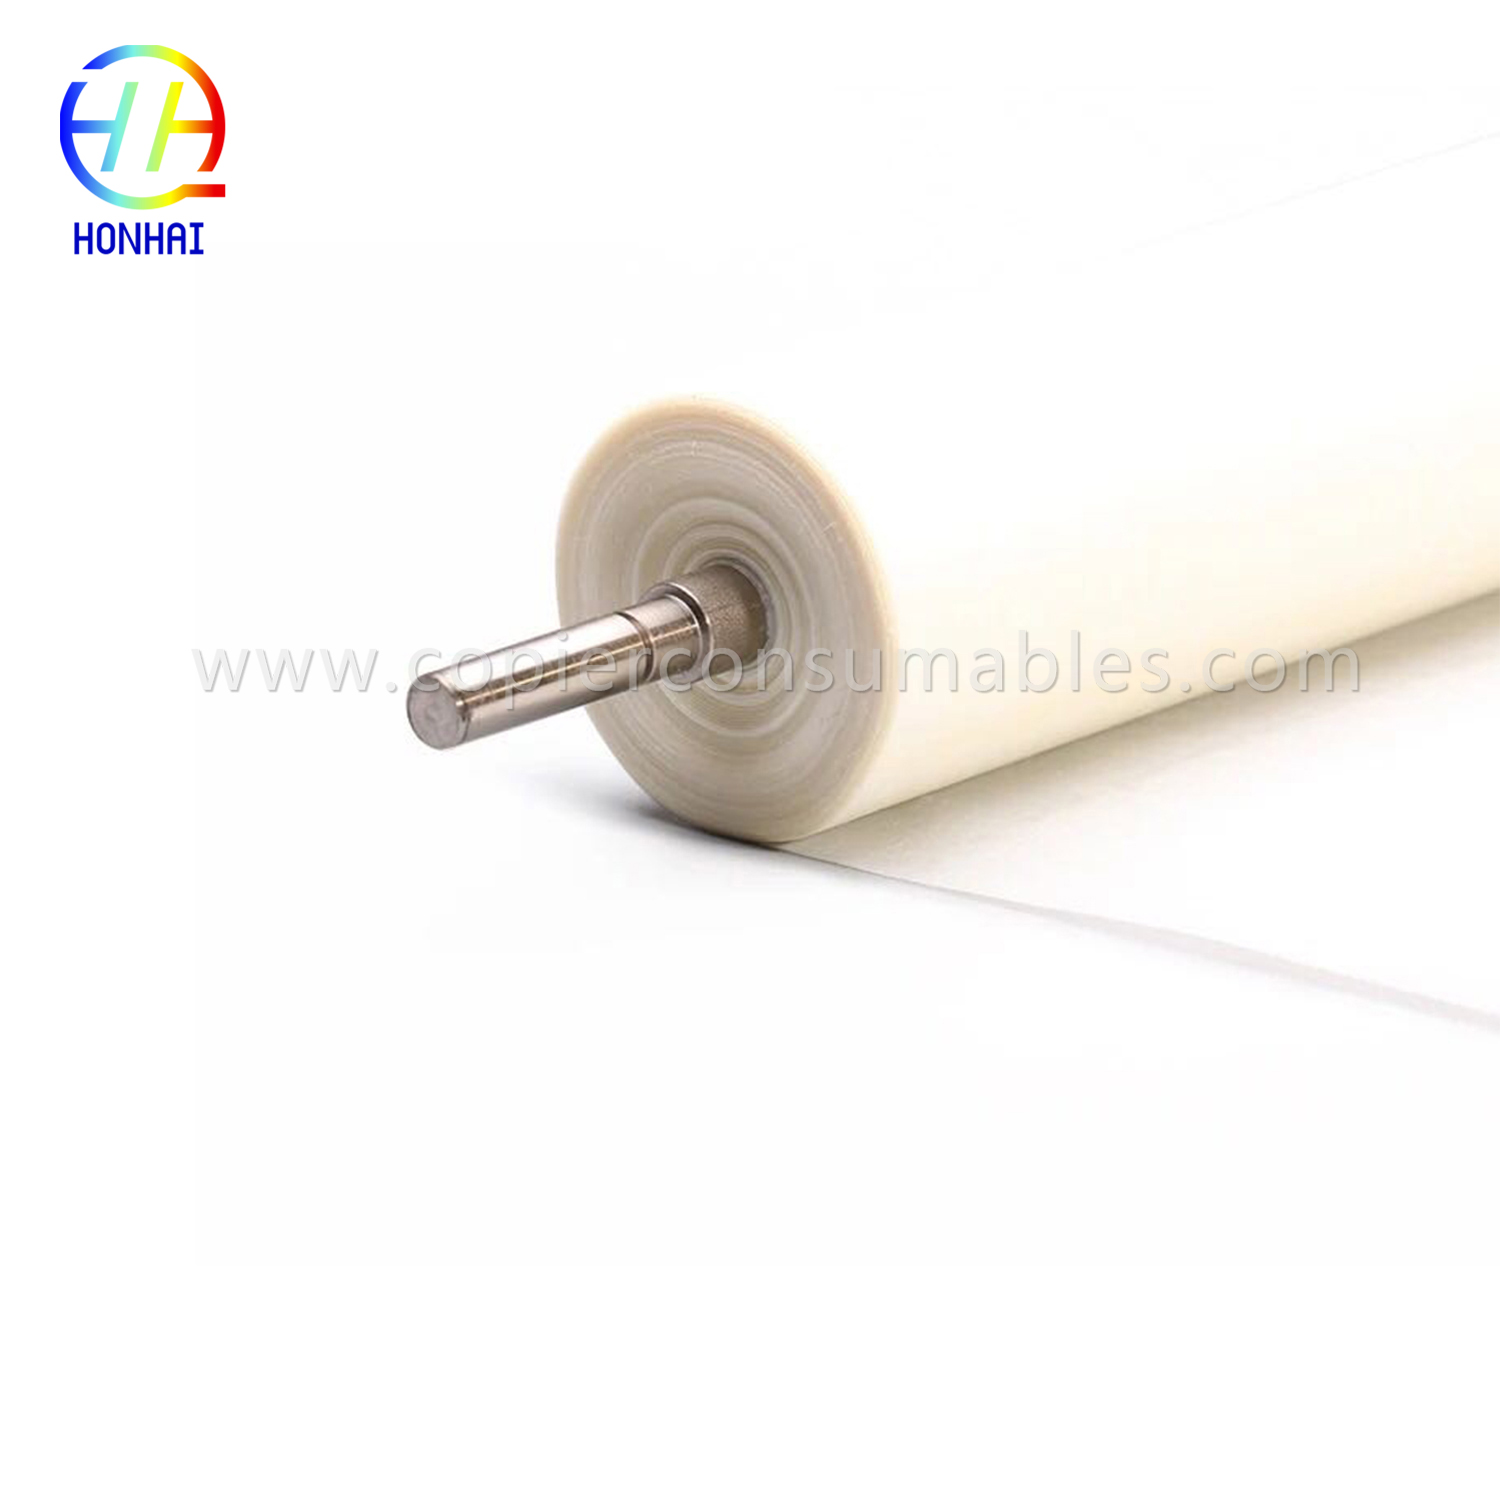 Fuser Cleaning Web Roller for Xerox 4110 4112 4127 4590 4595 (8R13042 8R13085 8R13000) (2) 拷贝